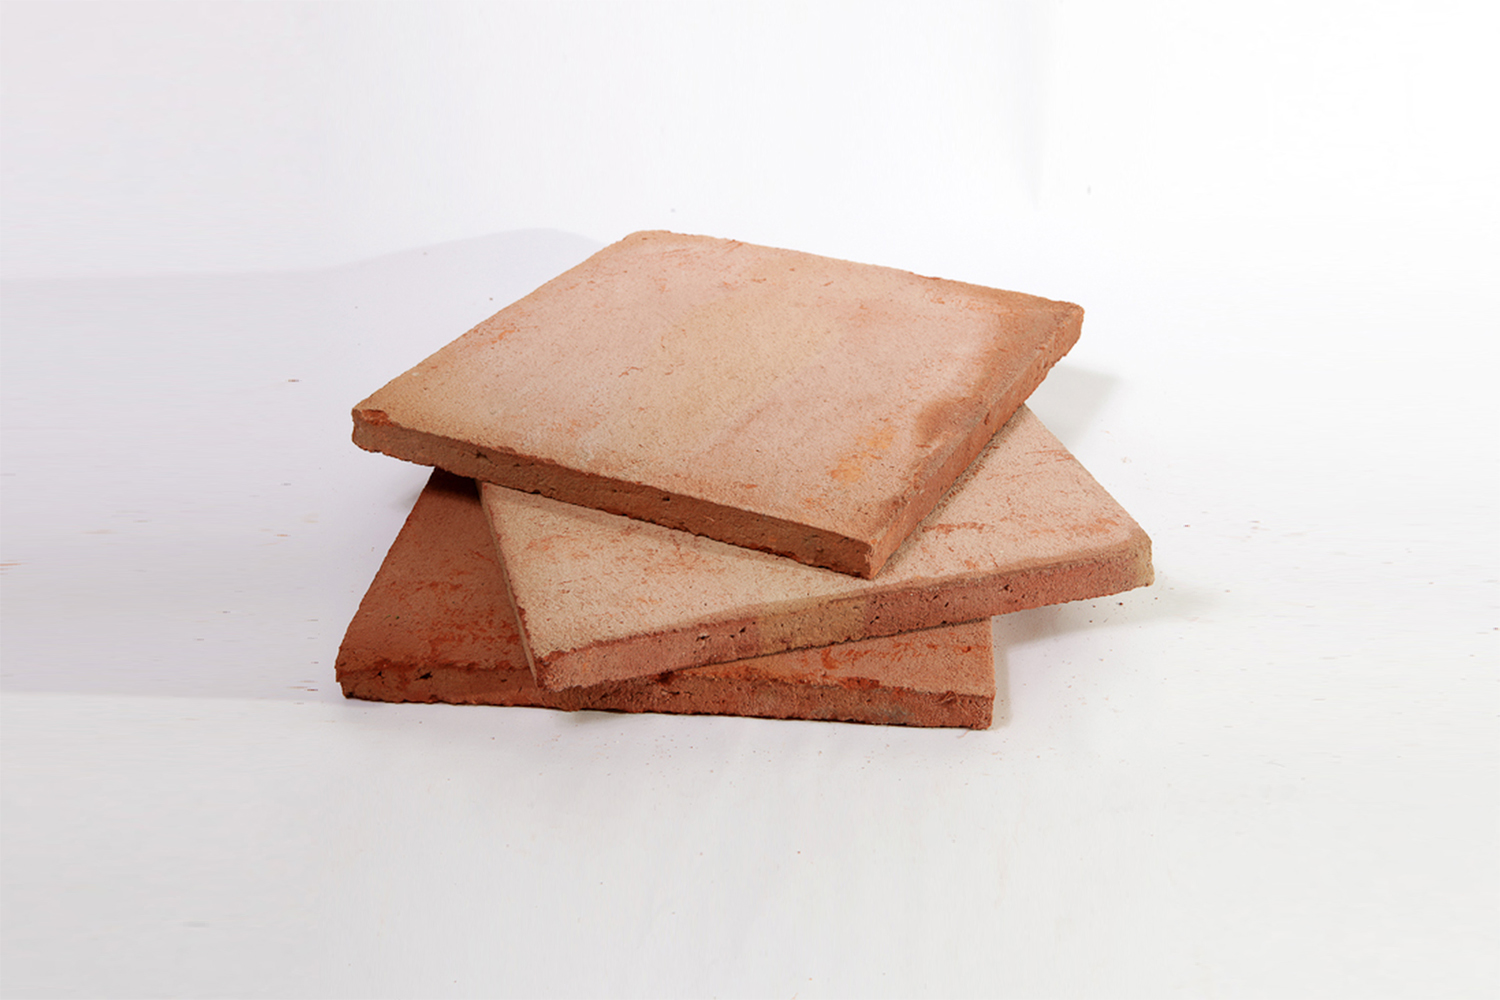 the floor tiles are from living terracotta. shown here are the traditional terr 13